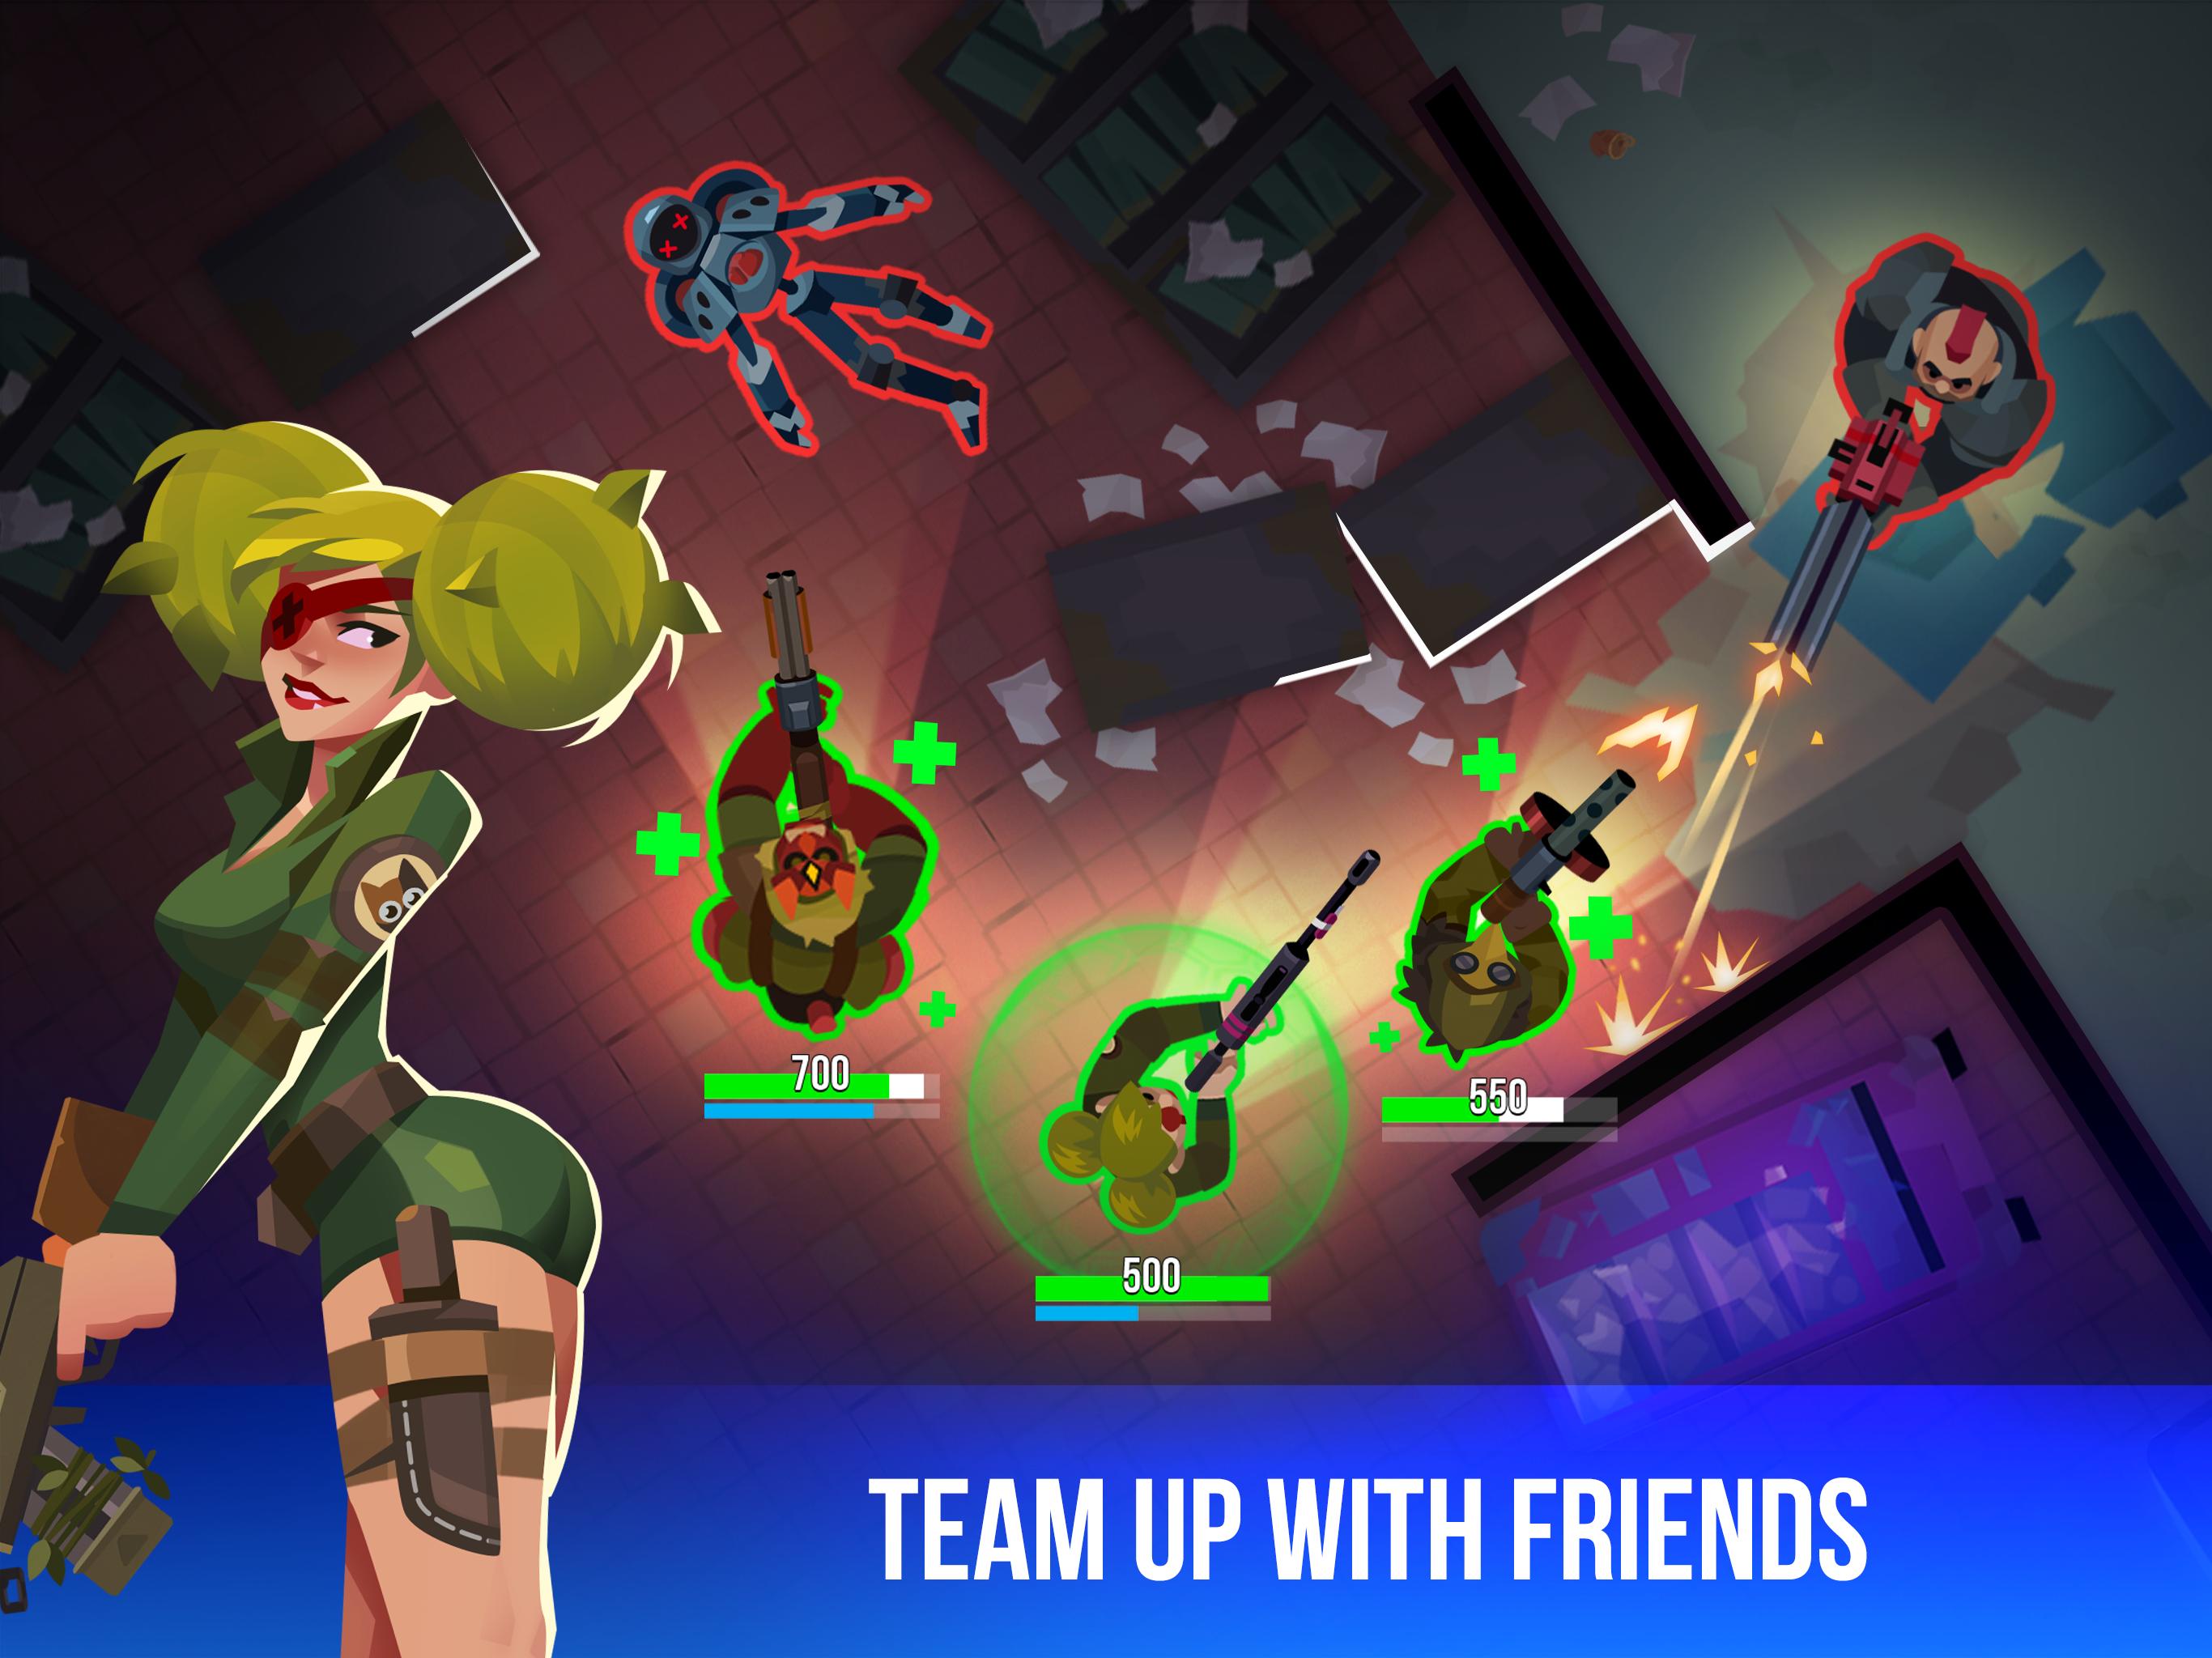 Bullet Echo for Android - APK Download